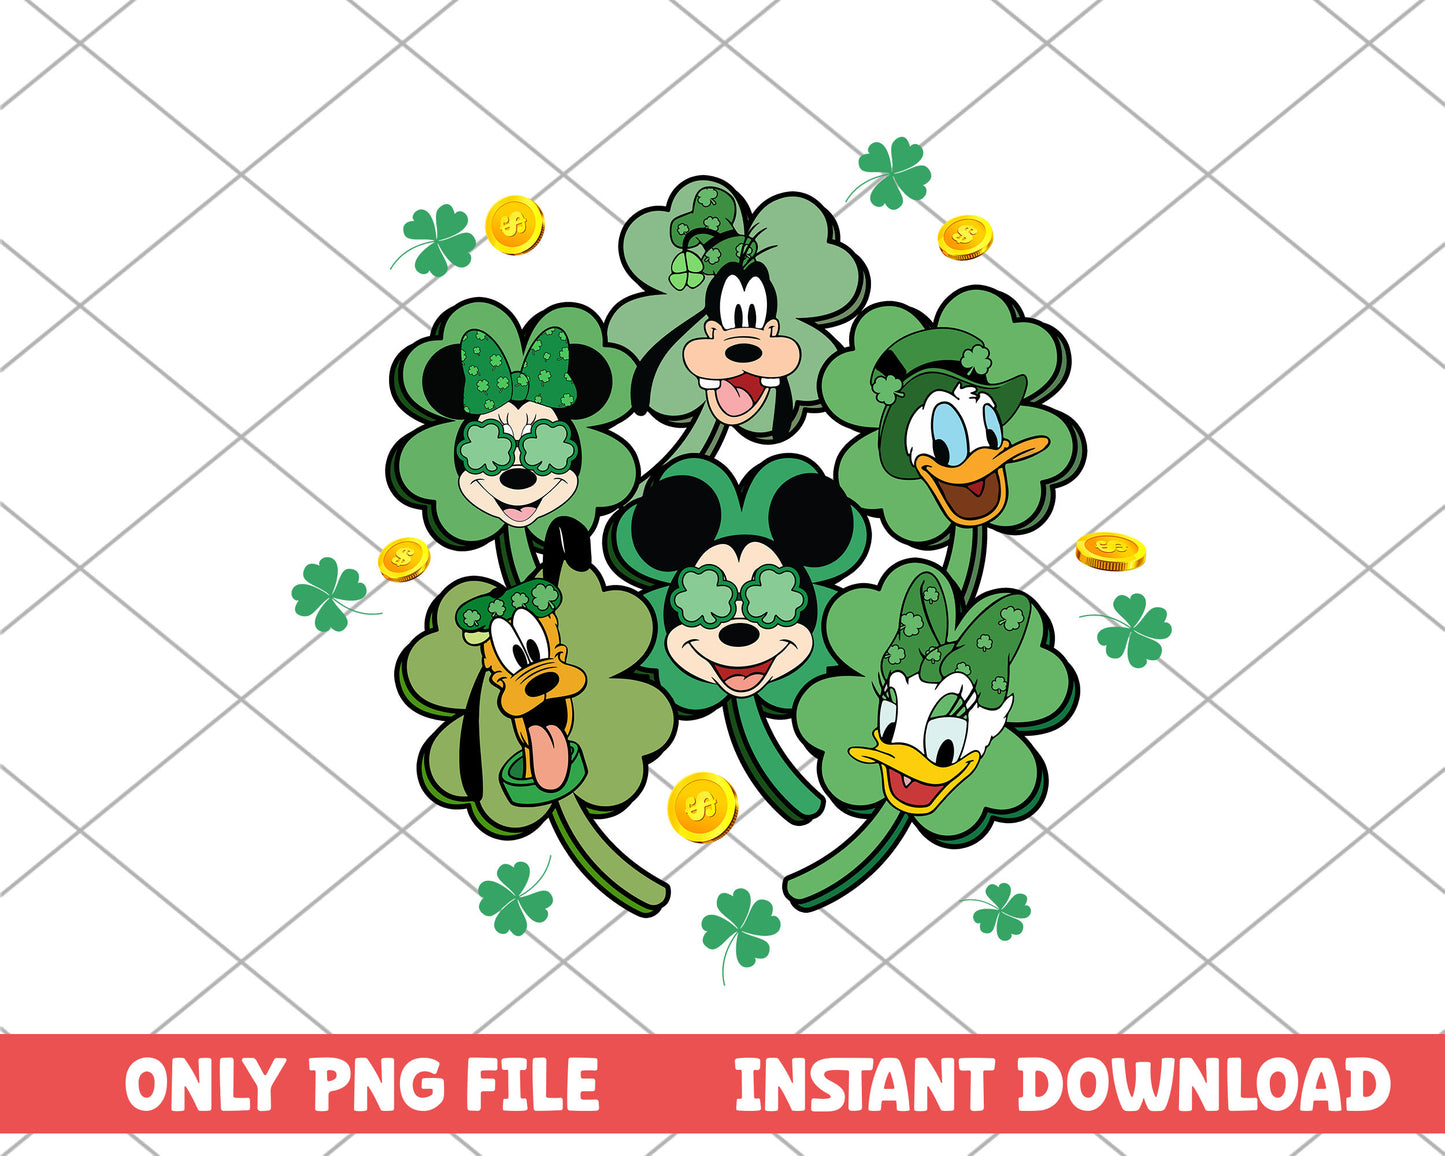 Friends of disney st.patrick day png 